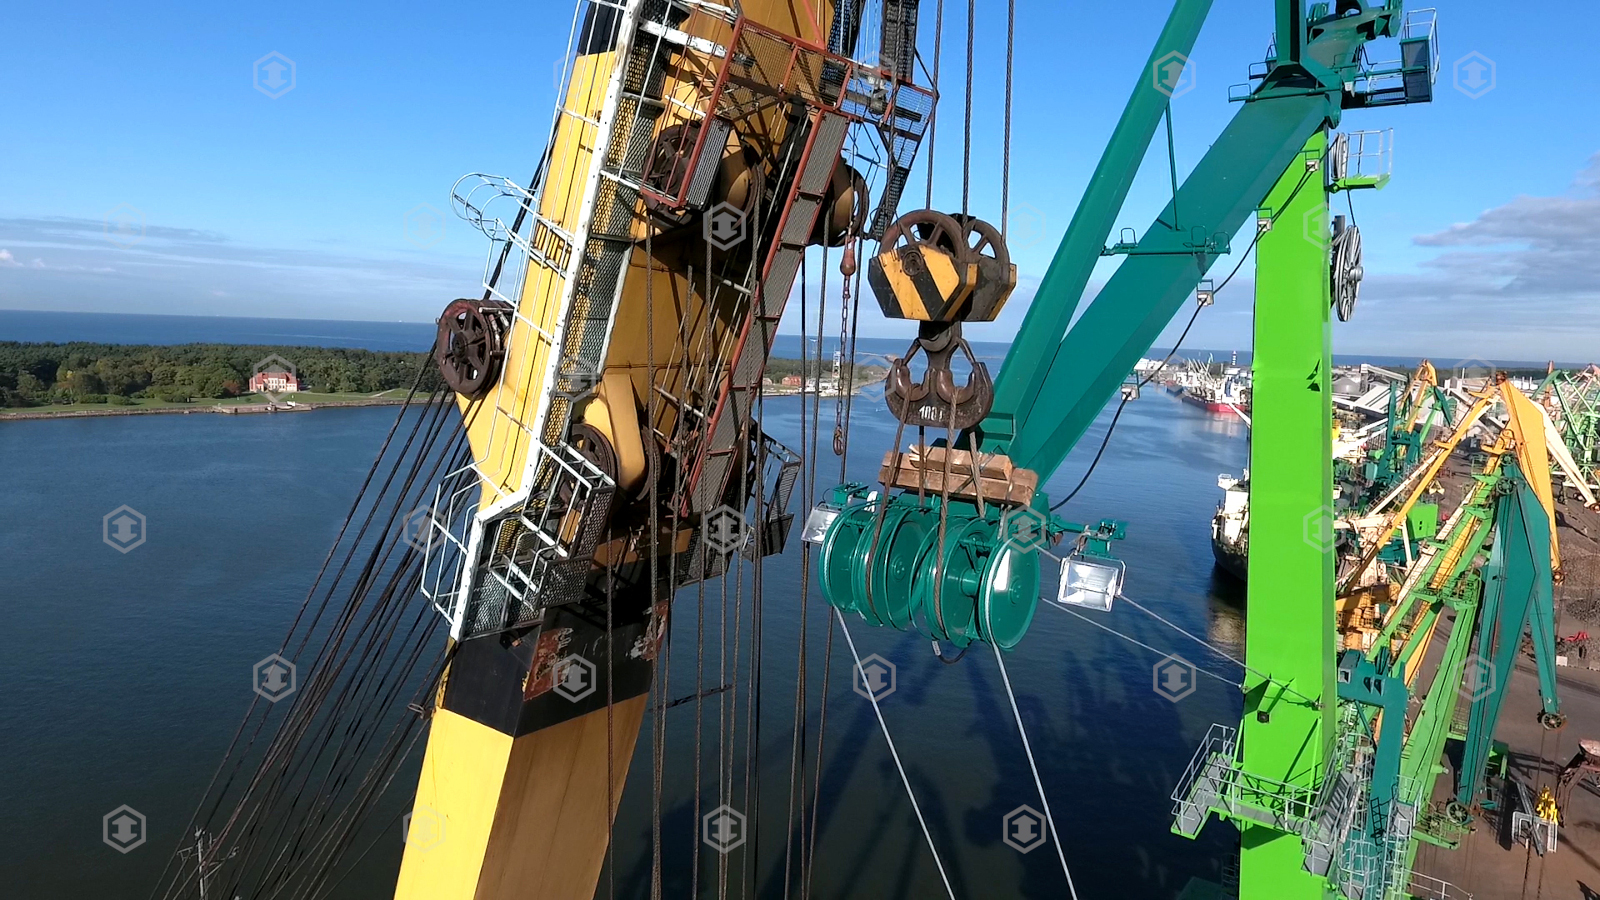 Assembly and installation of TUKAN gantry cranes